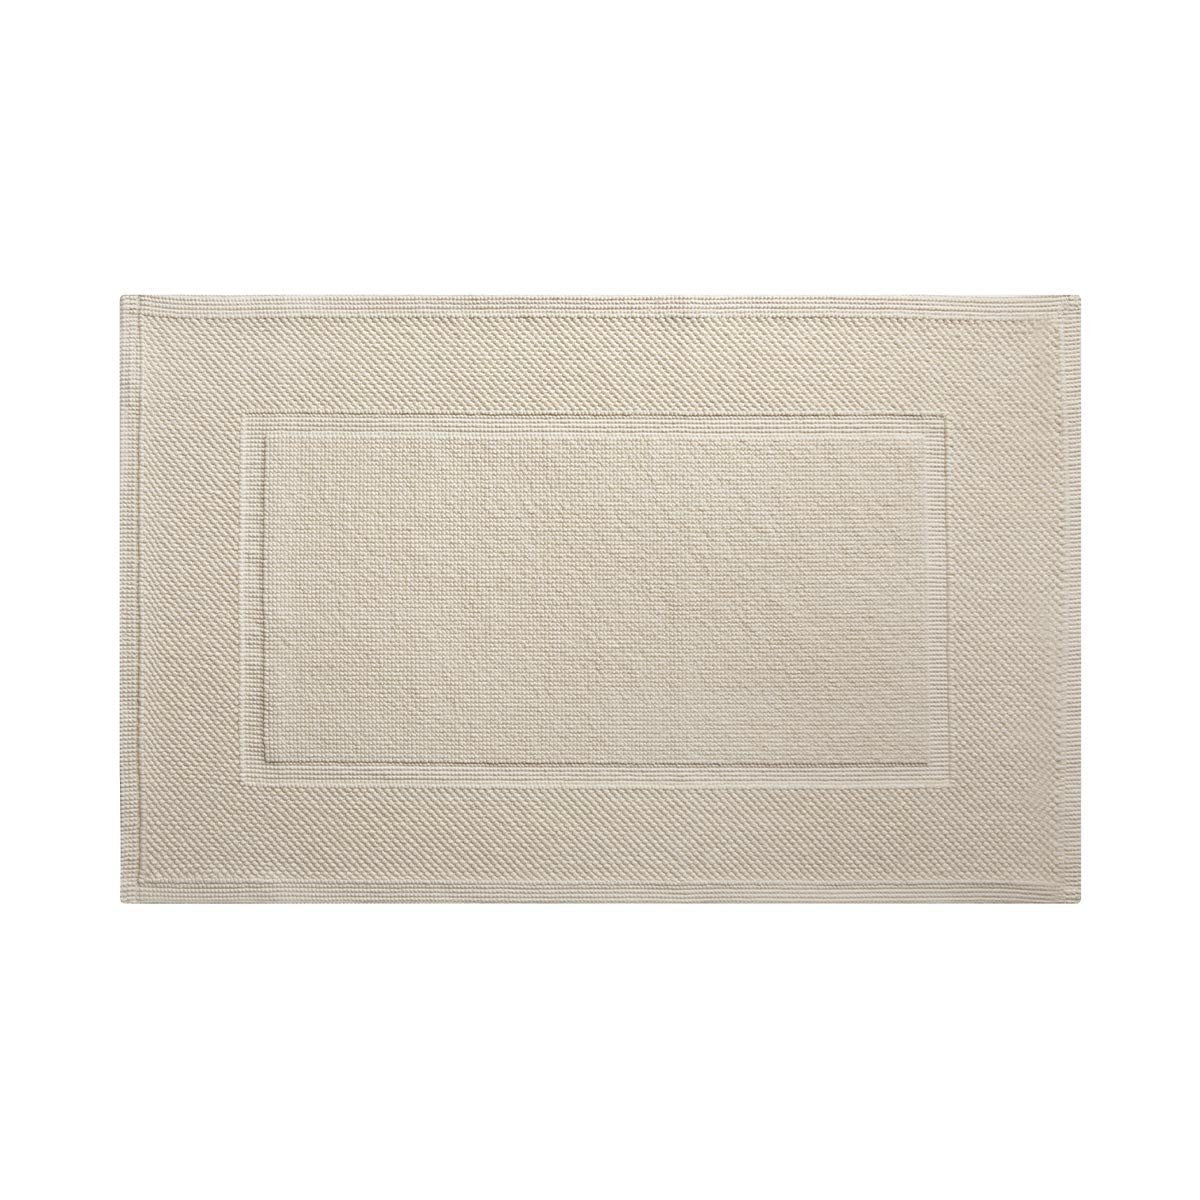 Eden Nacre Bath Mat by Yves Delorme | Fig Linens and Home - Ivory bath mat, rug